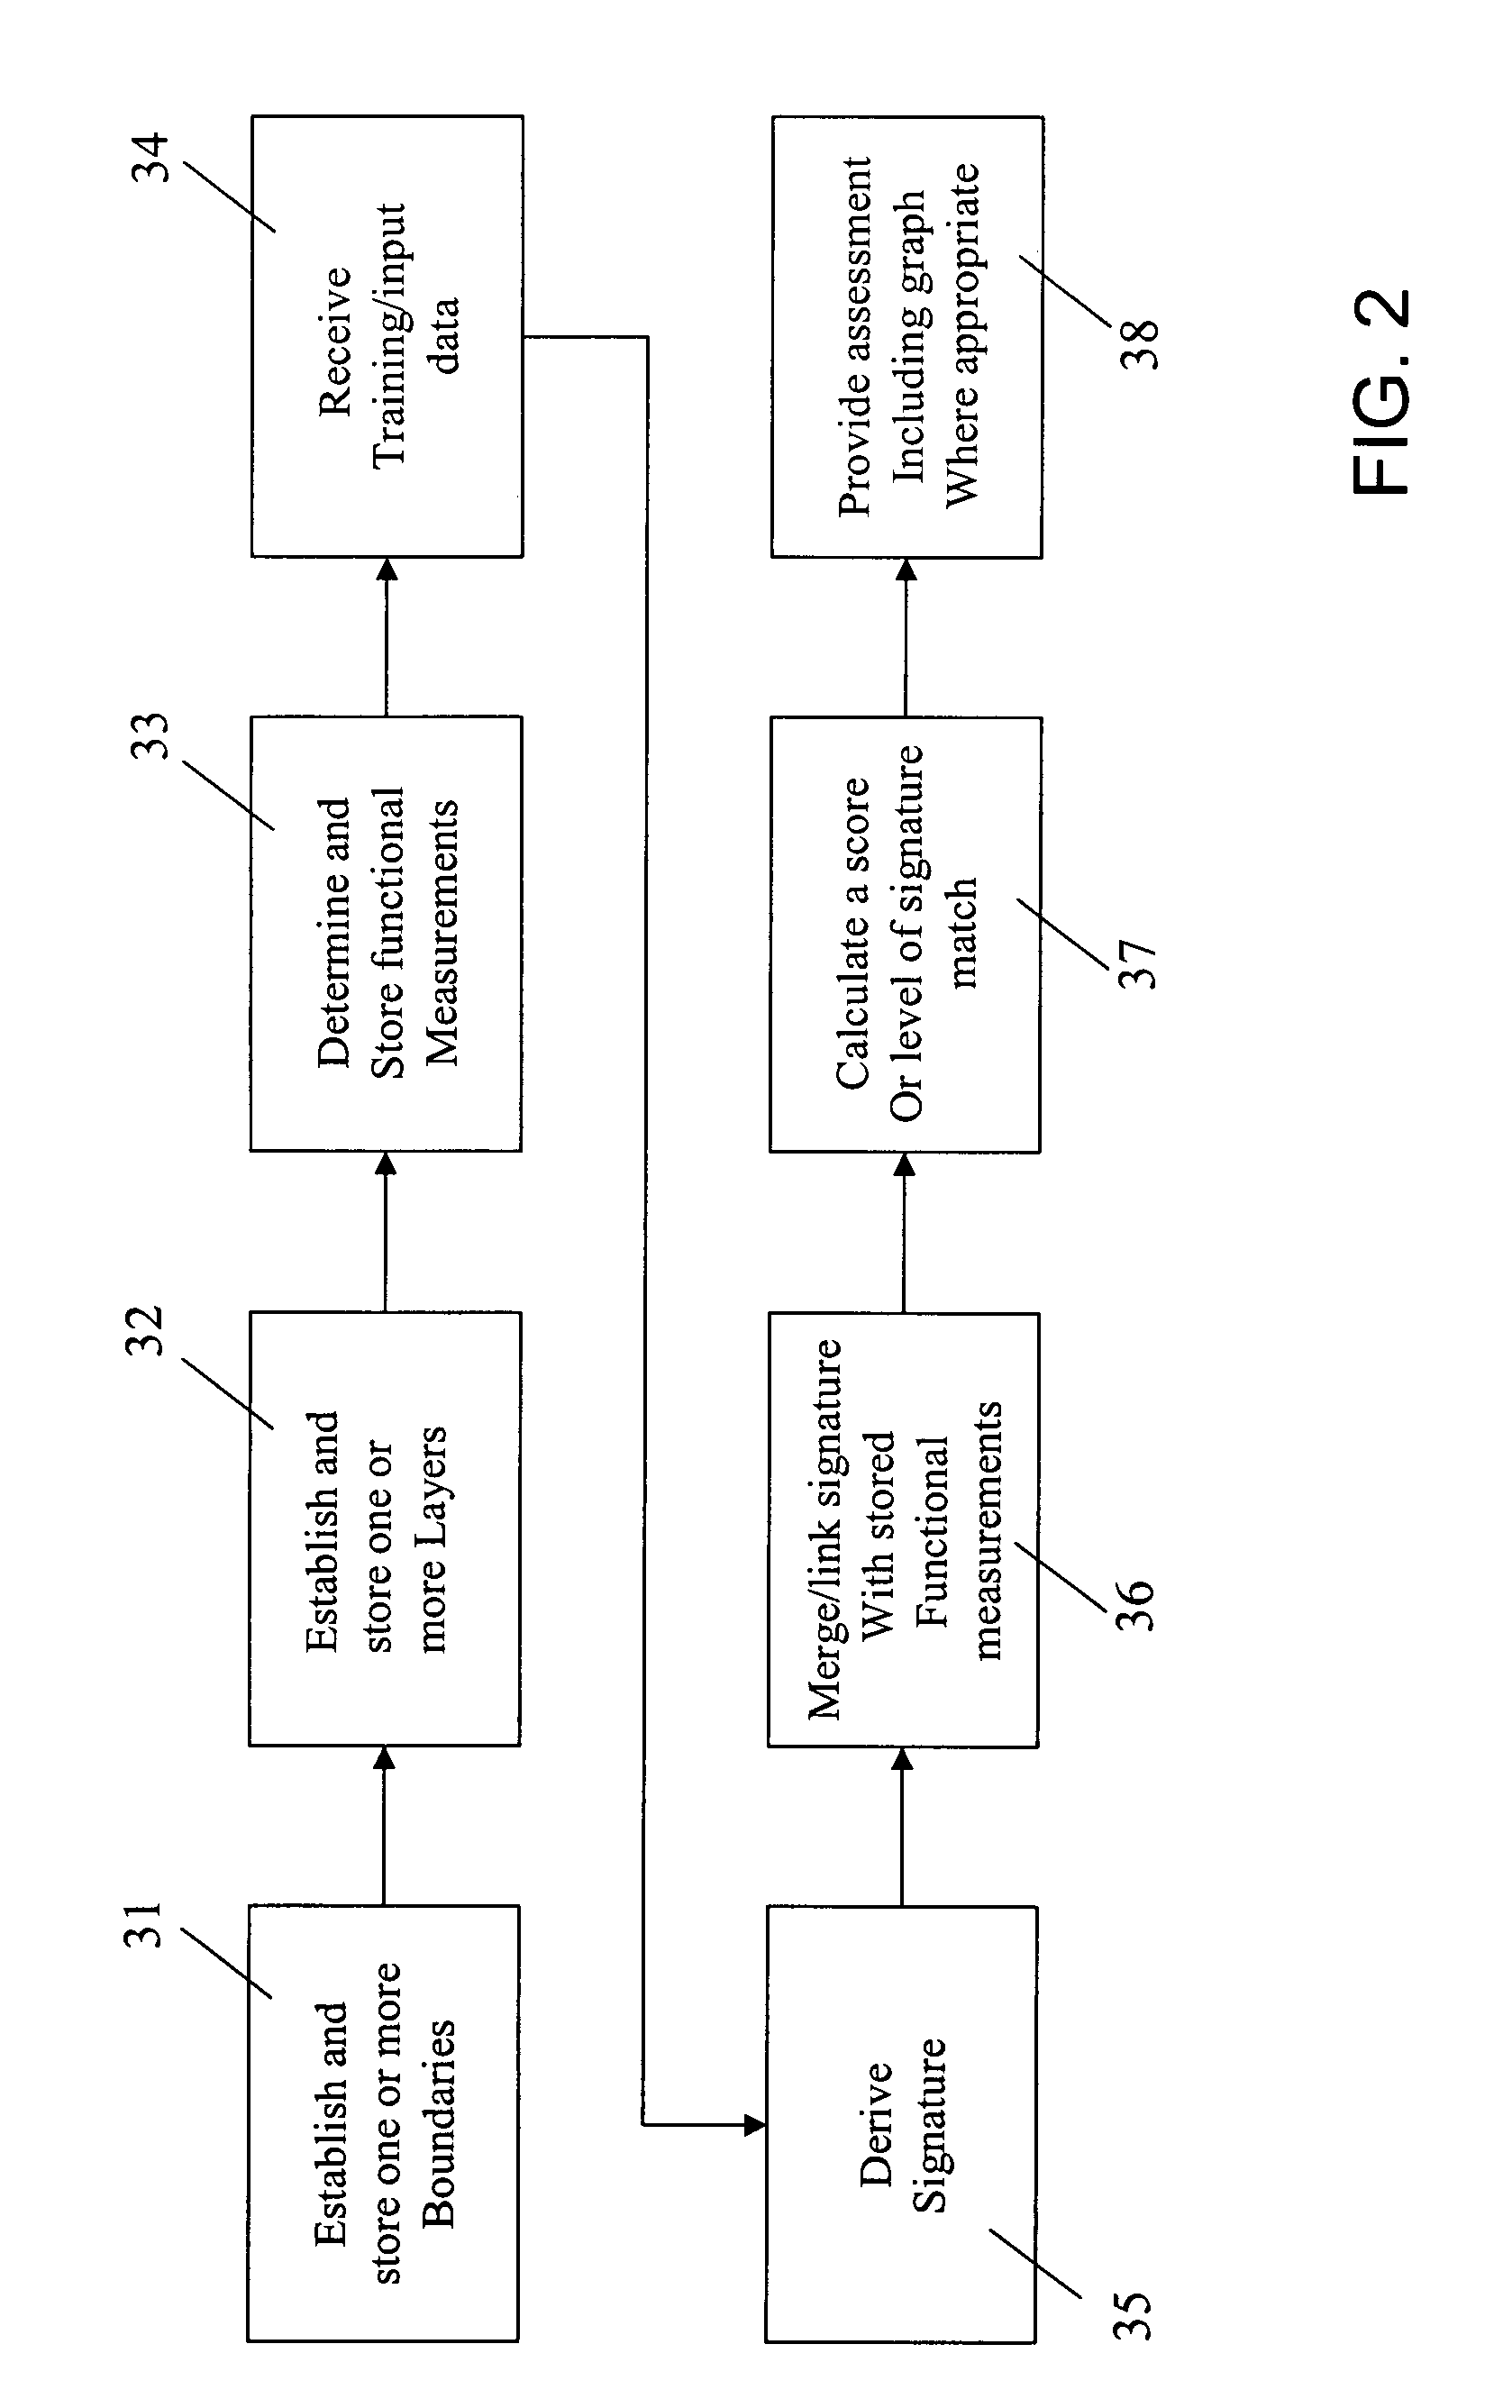 Event, threat and result change detection system and method